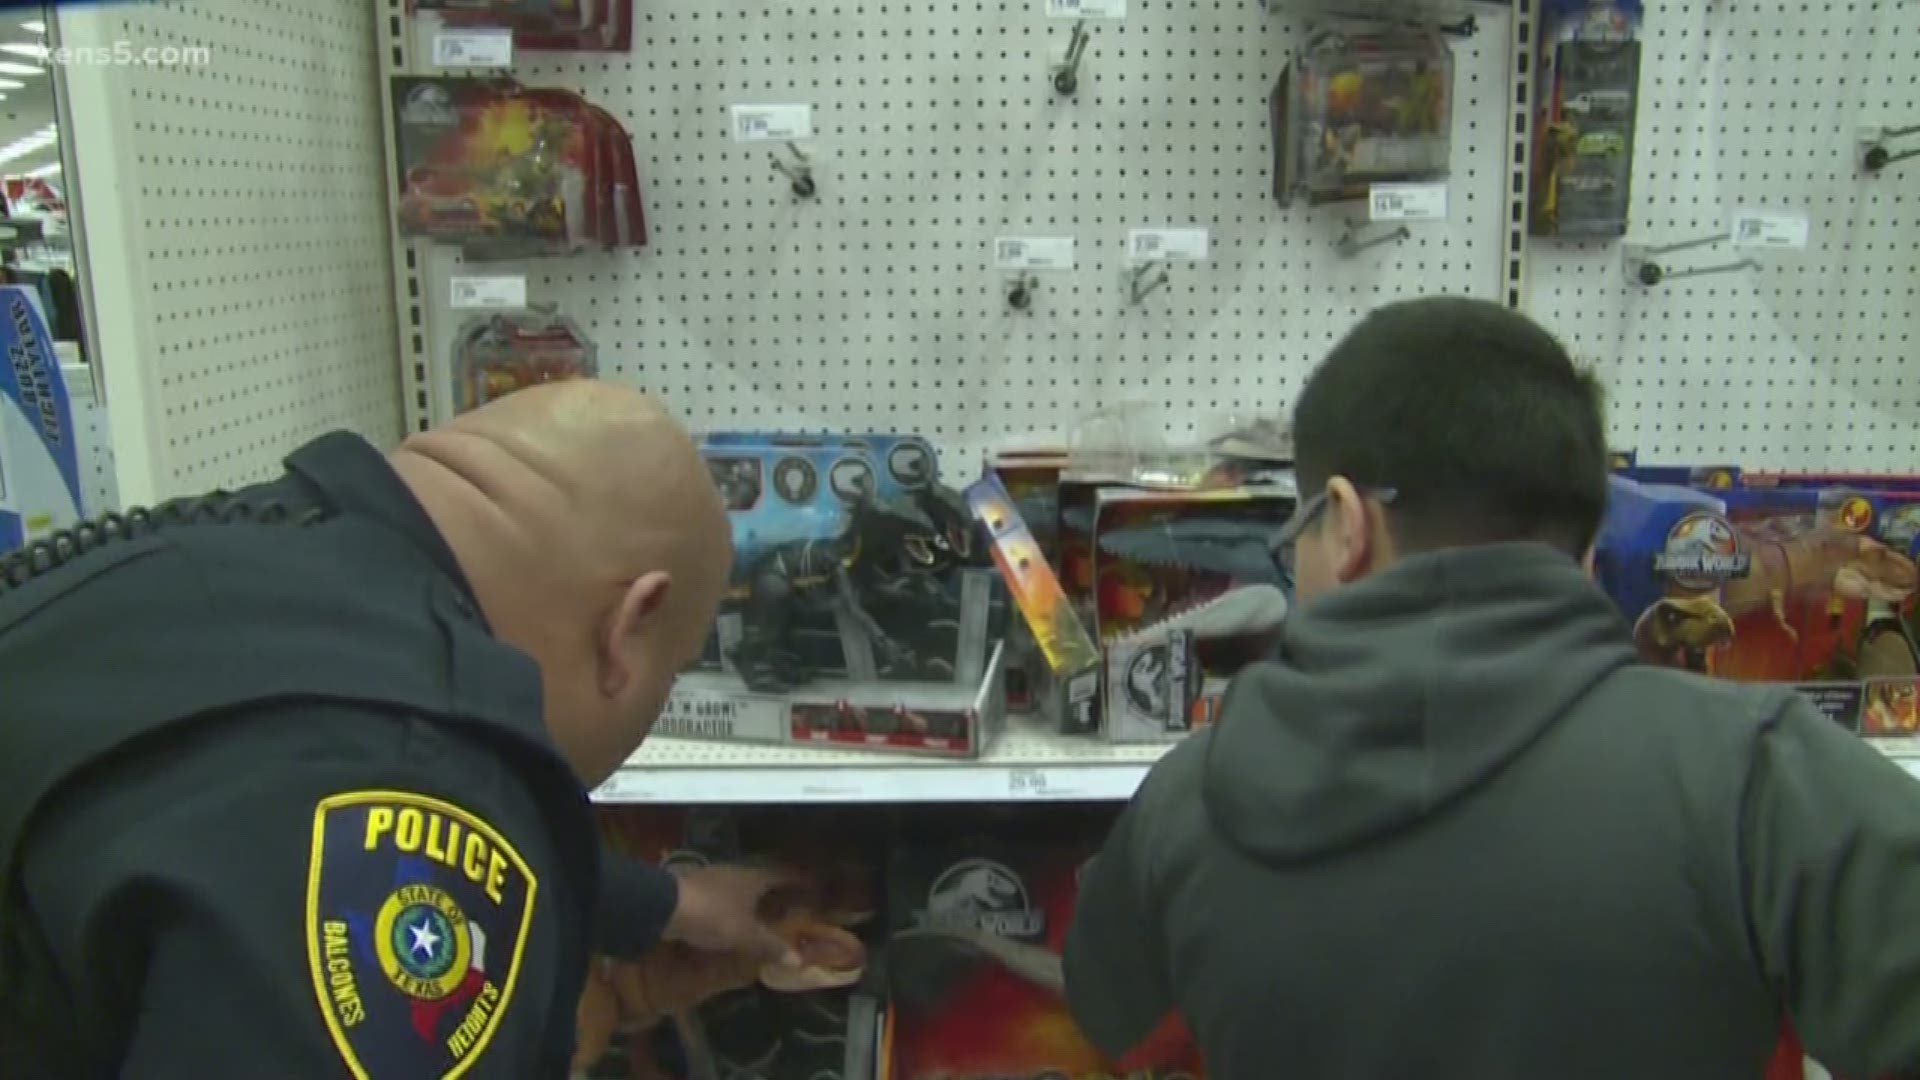 San Antonio's youngest teamed up with San Antonio's finest in a weekend Shop With A Cop event to forge new bonds.